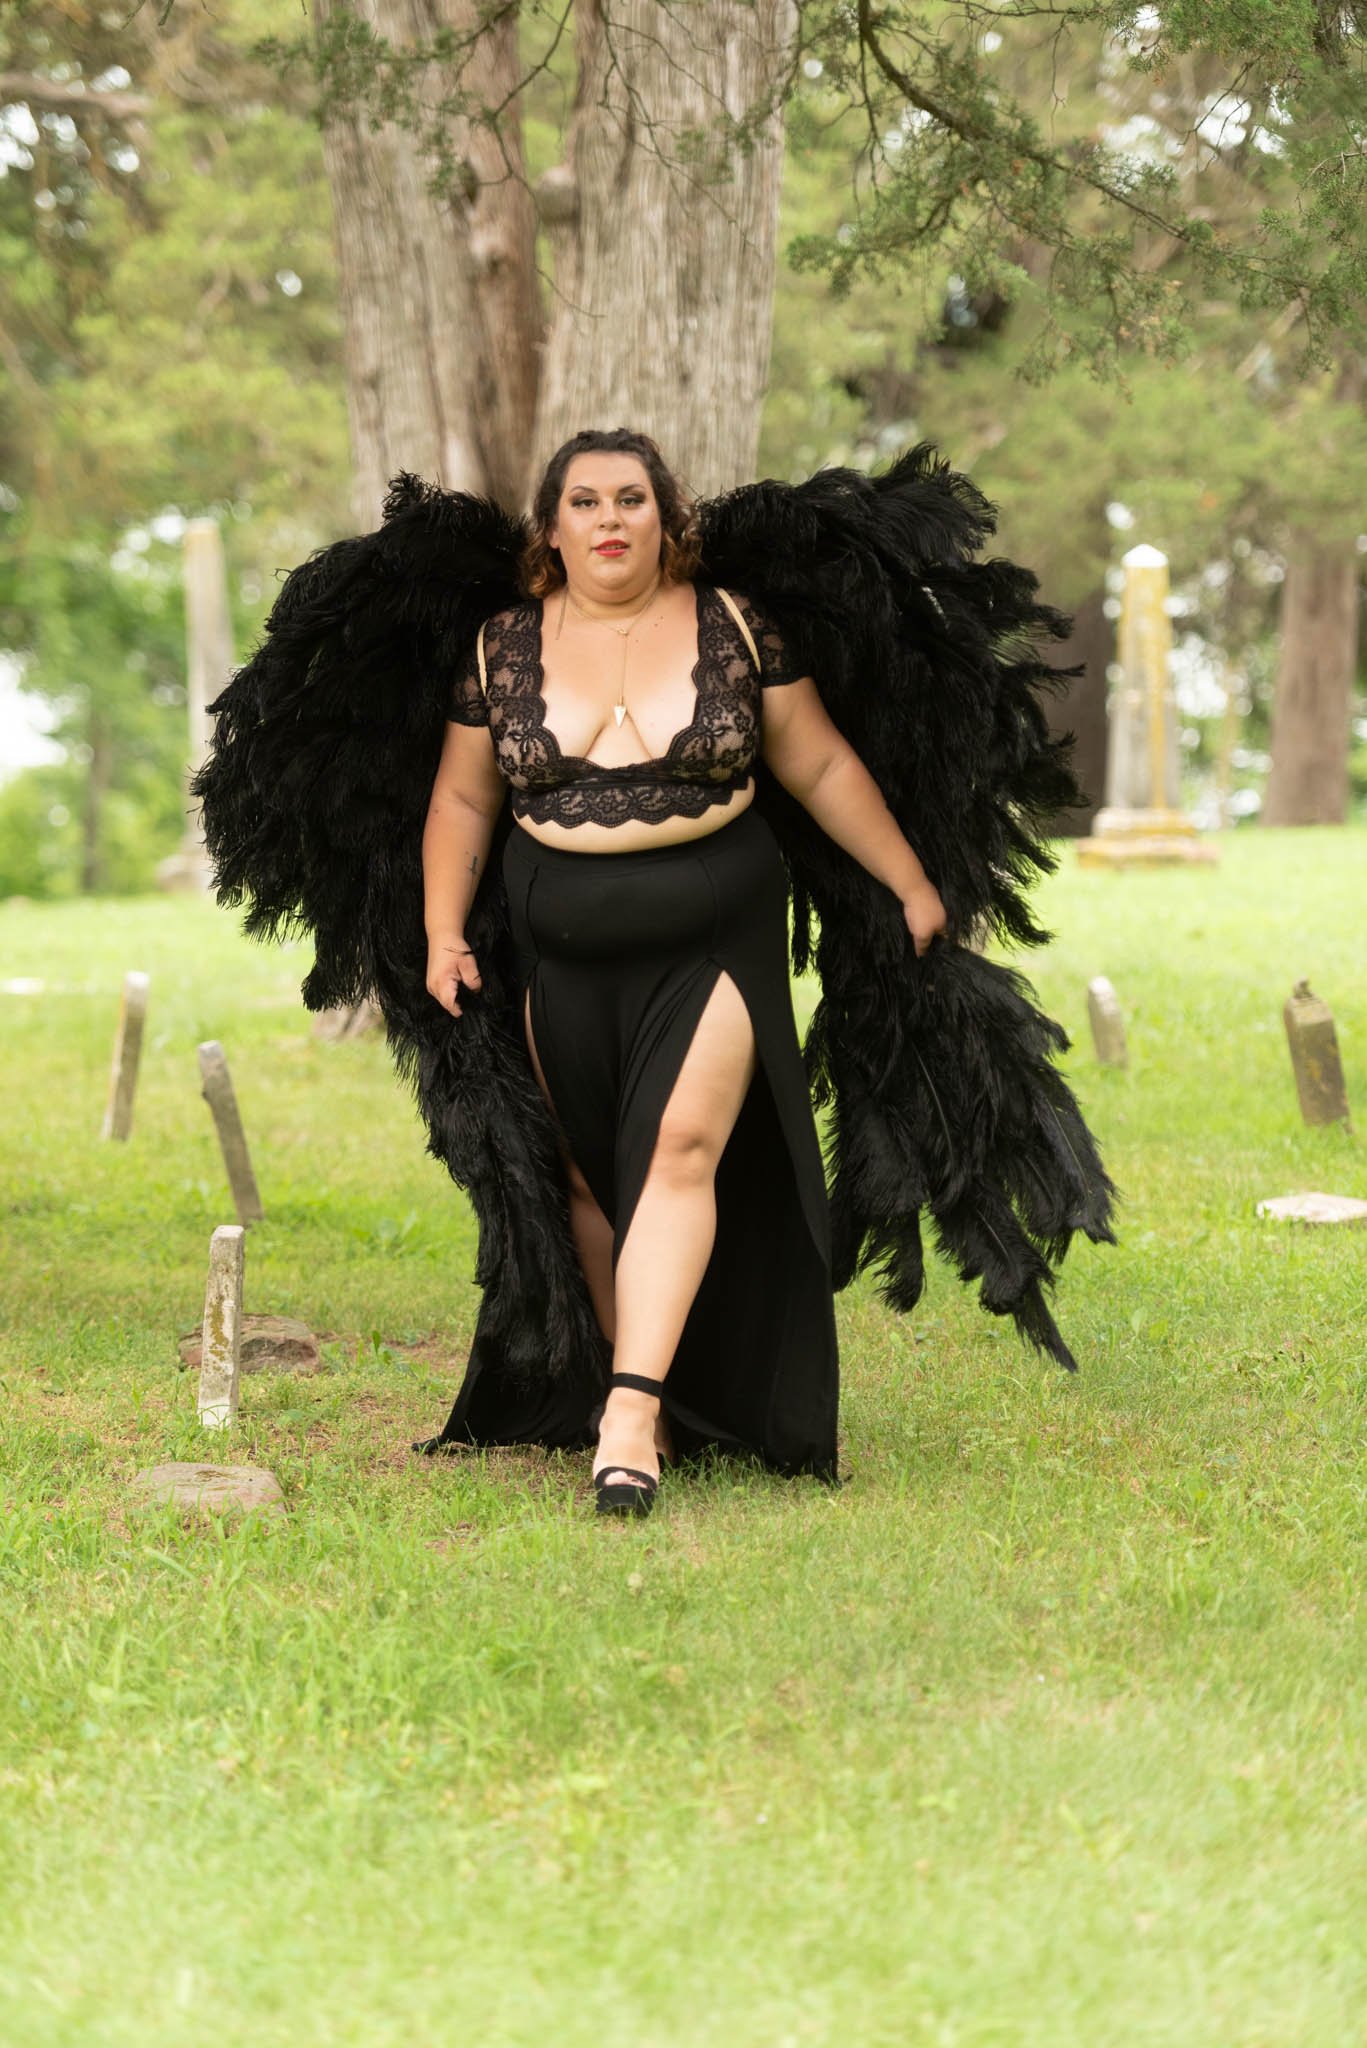  Samantha in black dress and black angel wings poses in cemetery. 